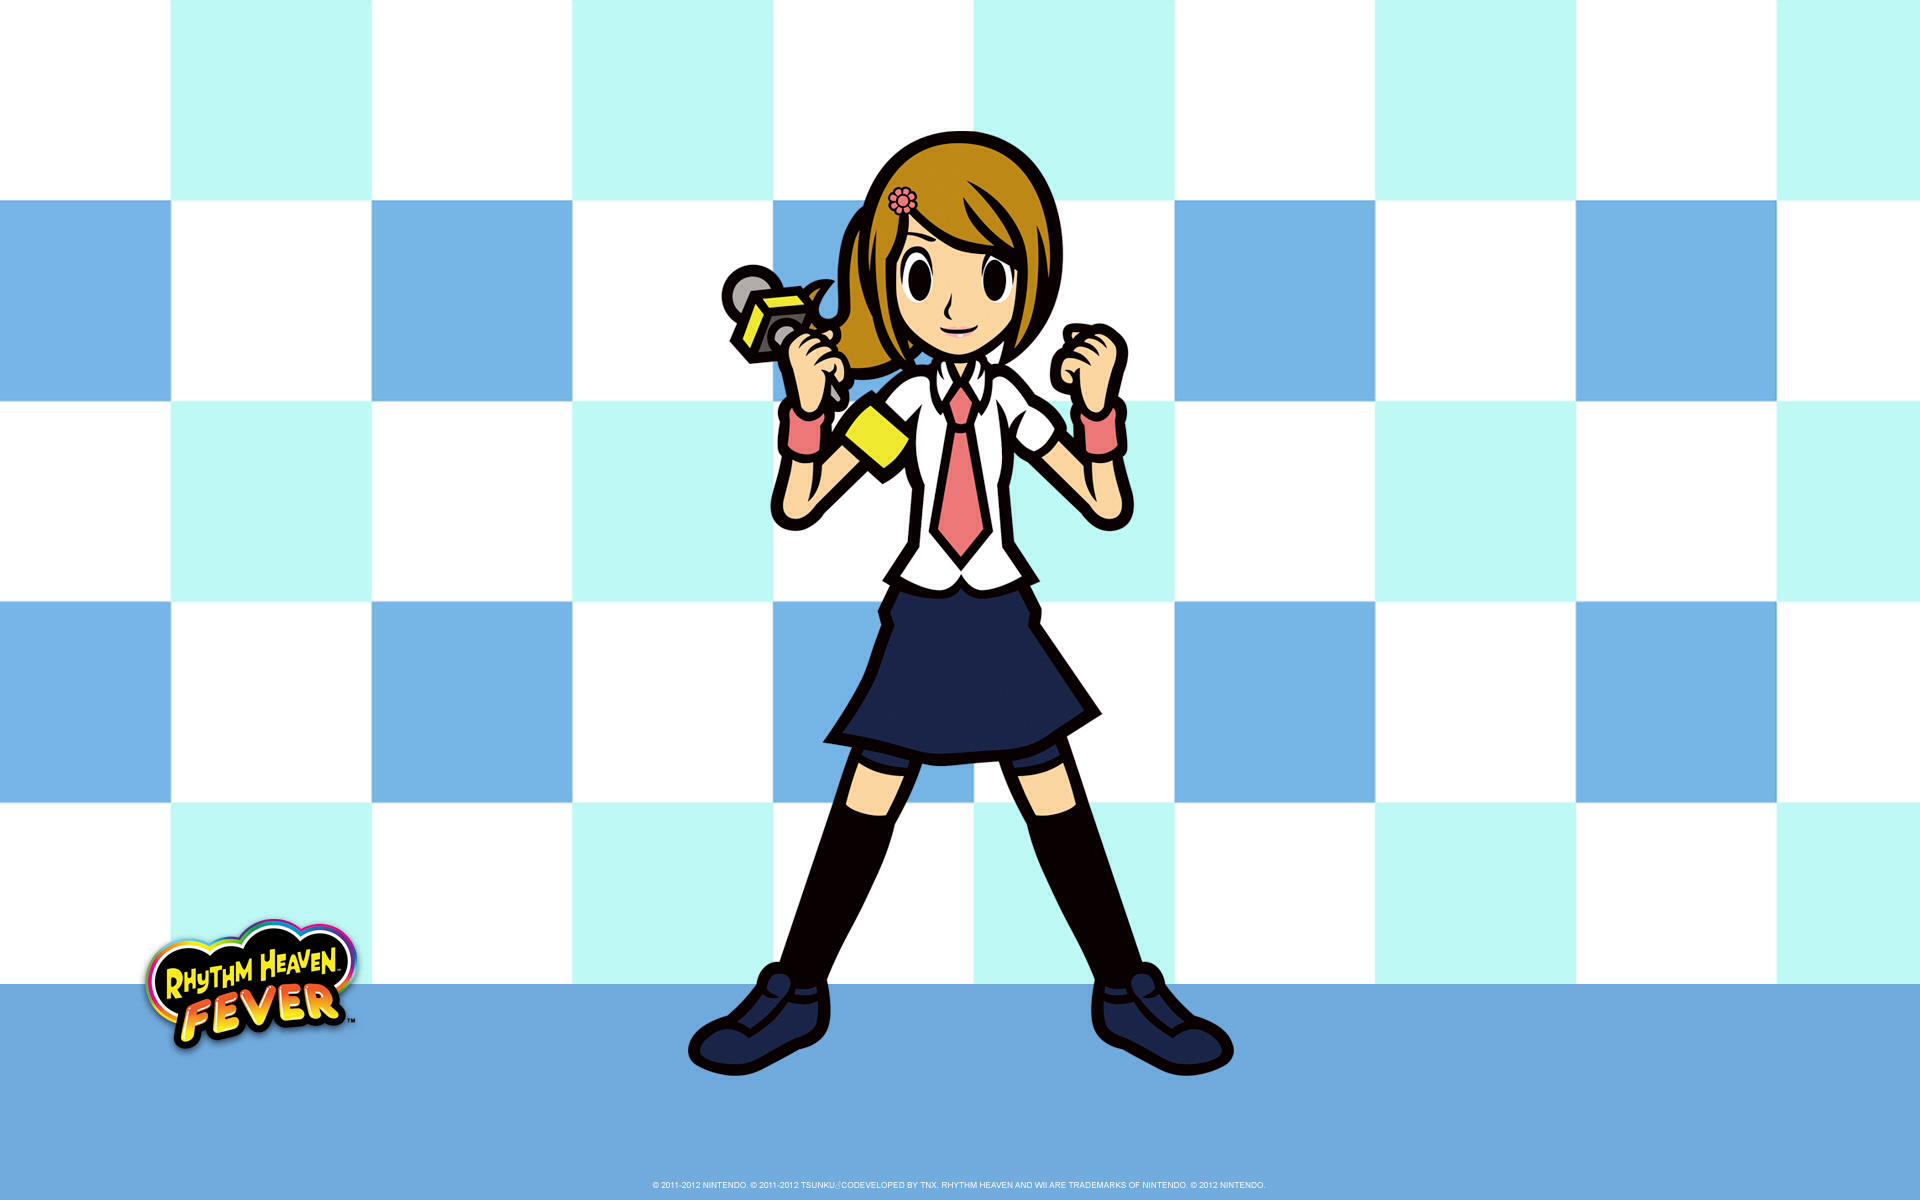 “"Girl from Rhythm Heaven" is a pretty solid aesthetic.” 